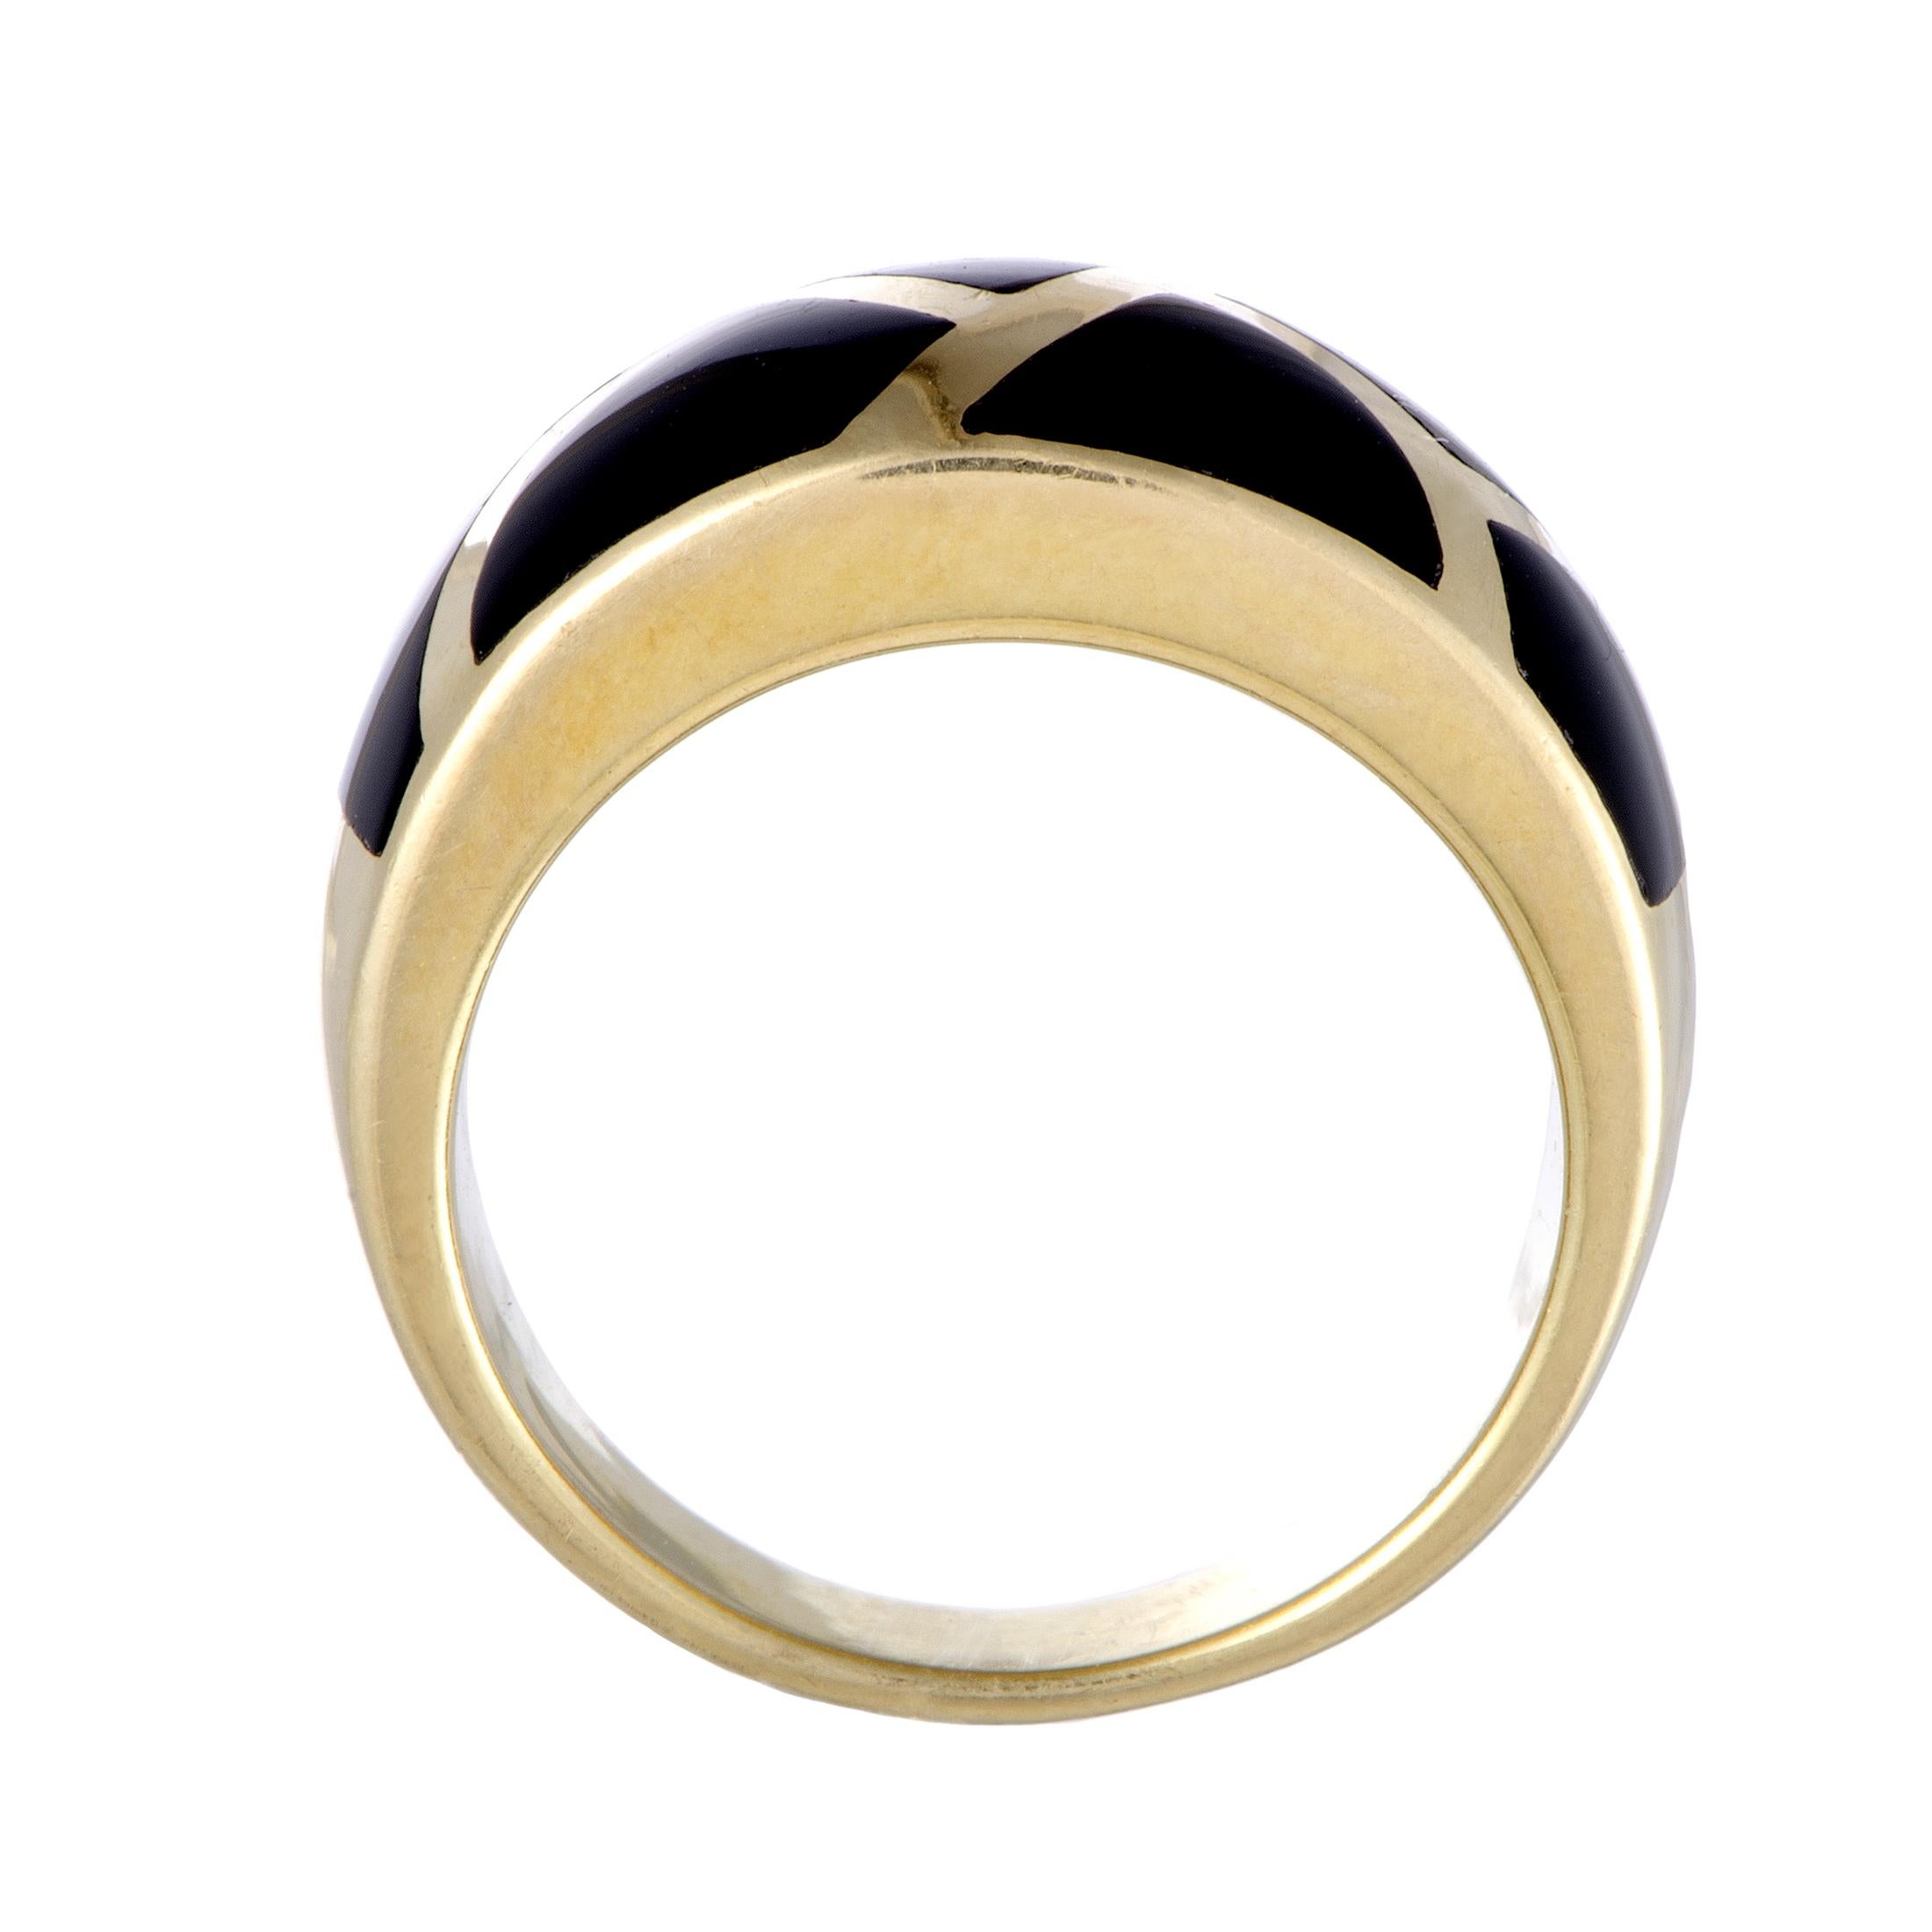 Boasting a captivatingly bold design, this exquisite Asch Grossbardt ring is a statement piece that will accentuate your outfit in a splendidly fashionable manner. The ring is made of eye-catching 14K yellow gold and weighs 7.6 grams.
